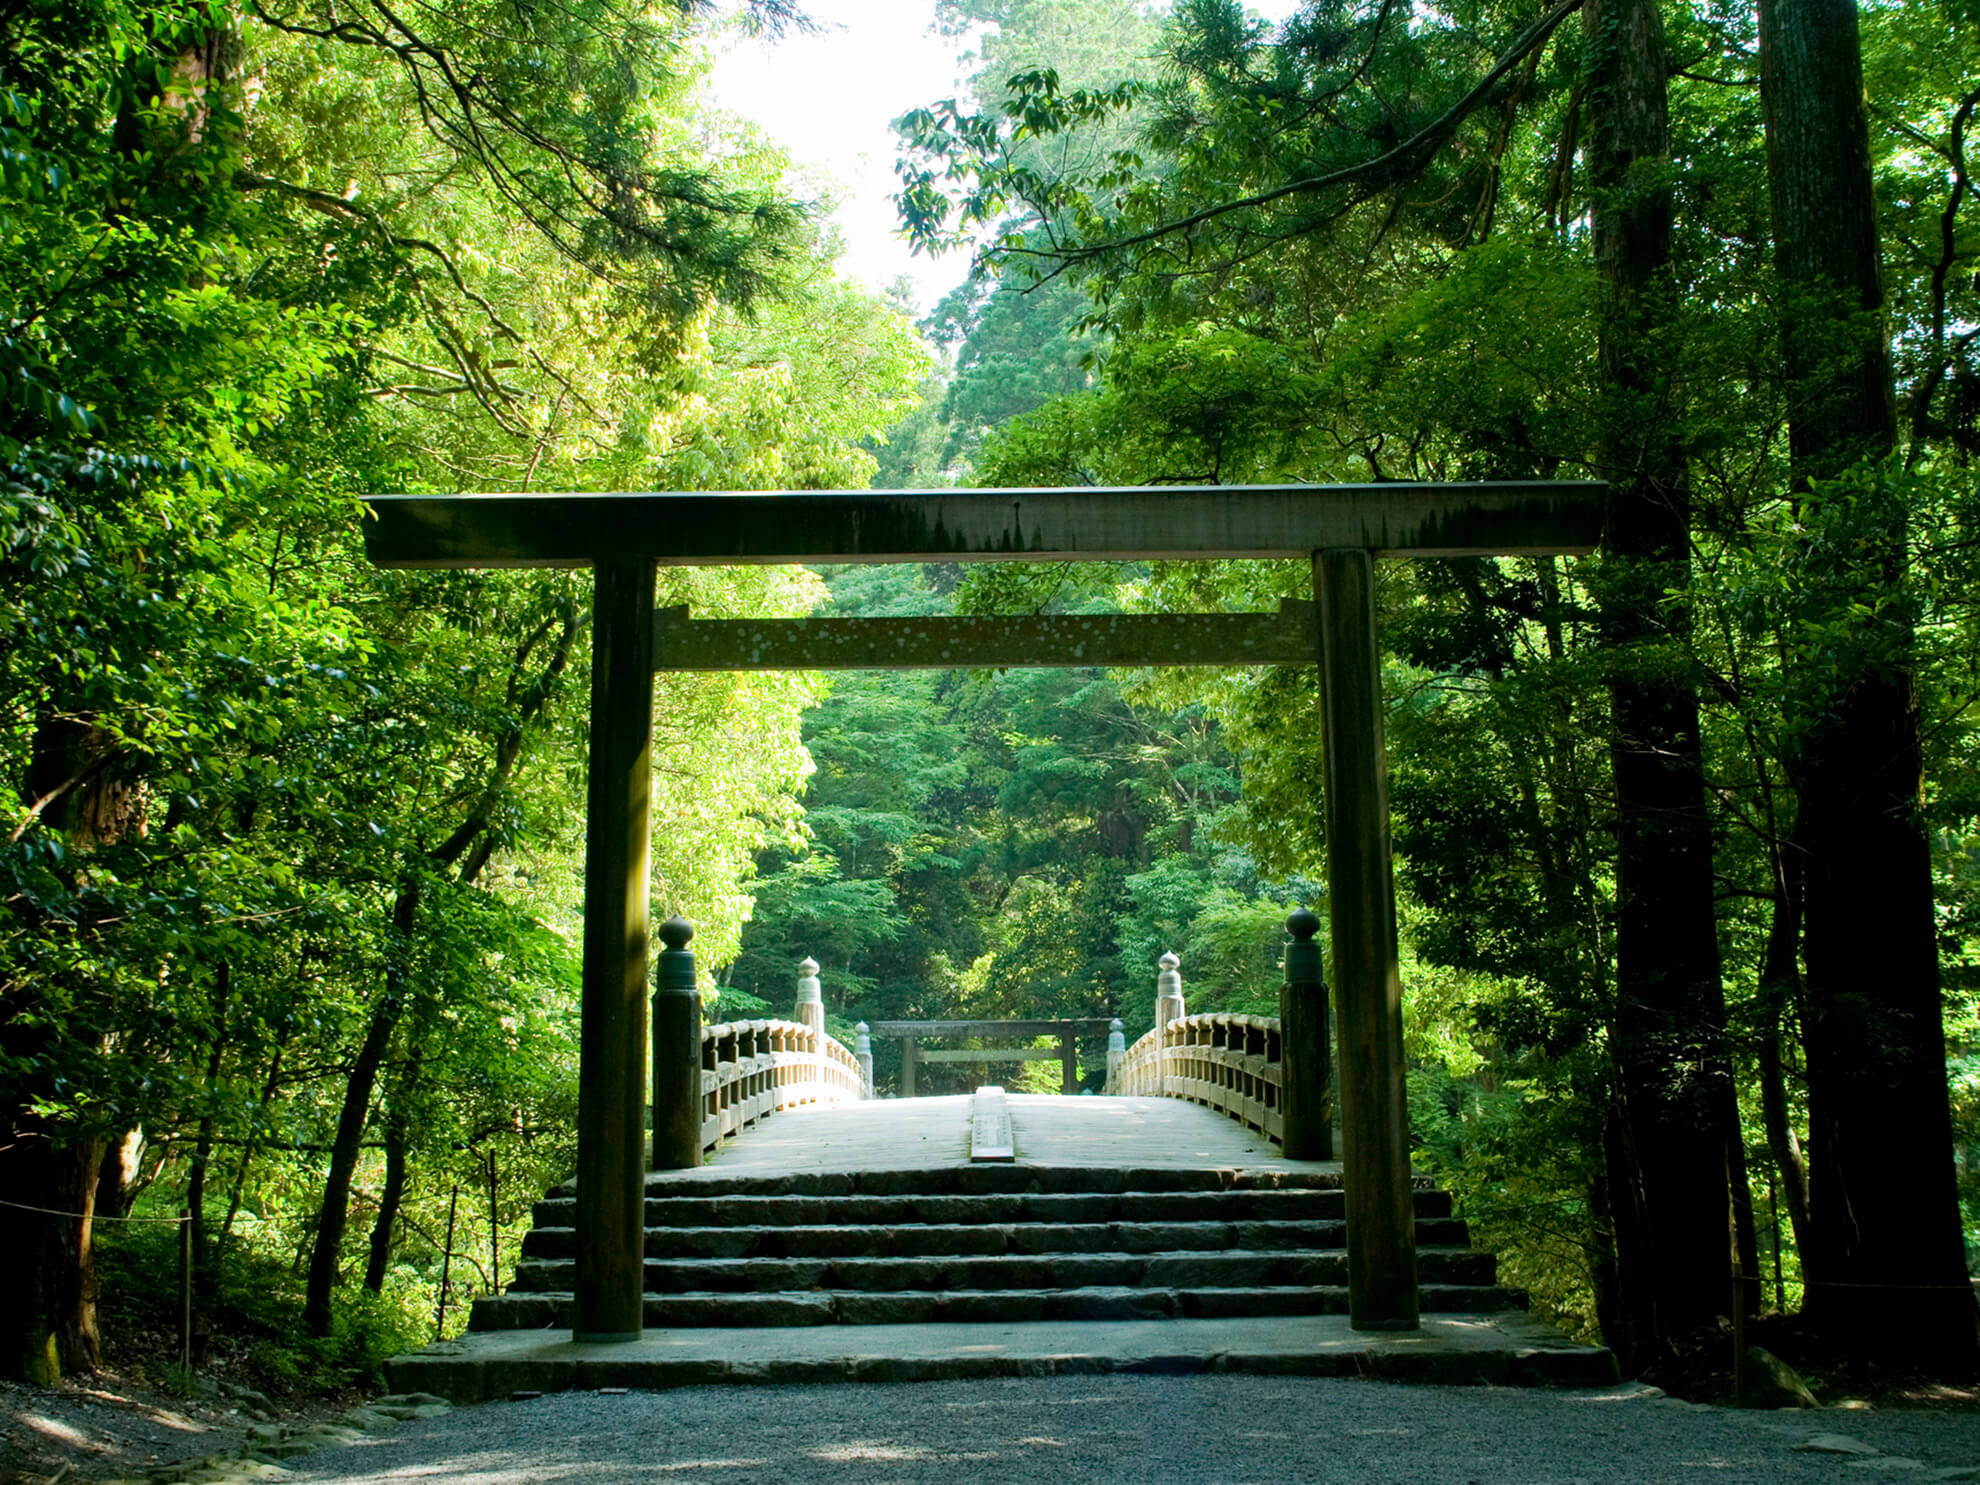 The Ancient Relationship Between the Ise Grand Shrine and Toba